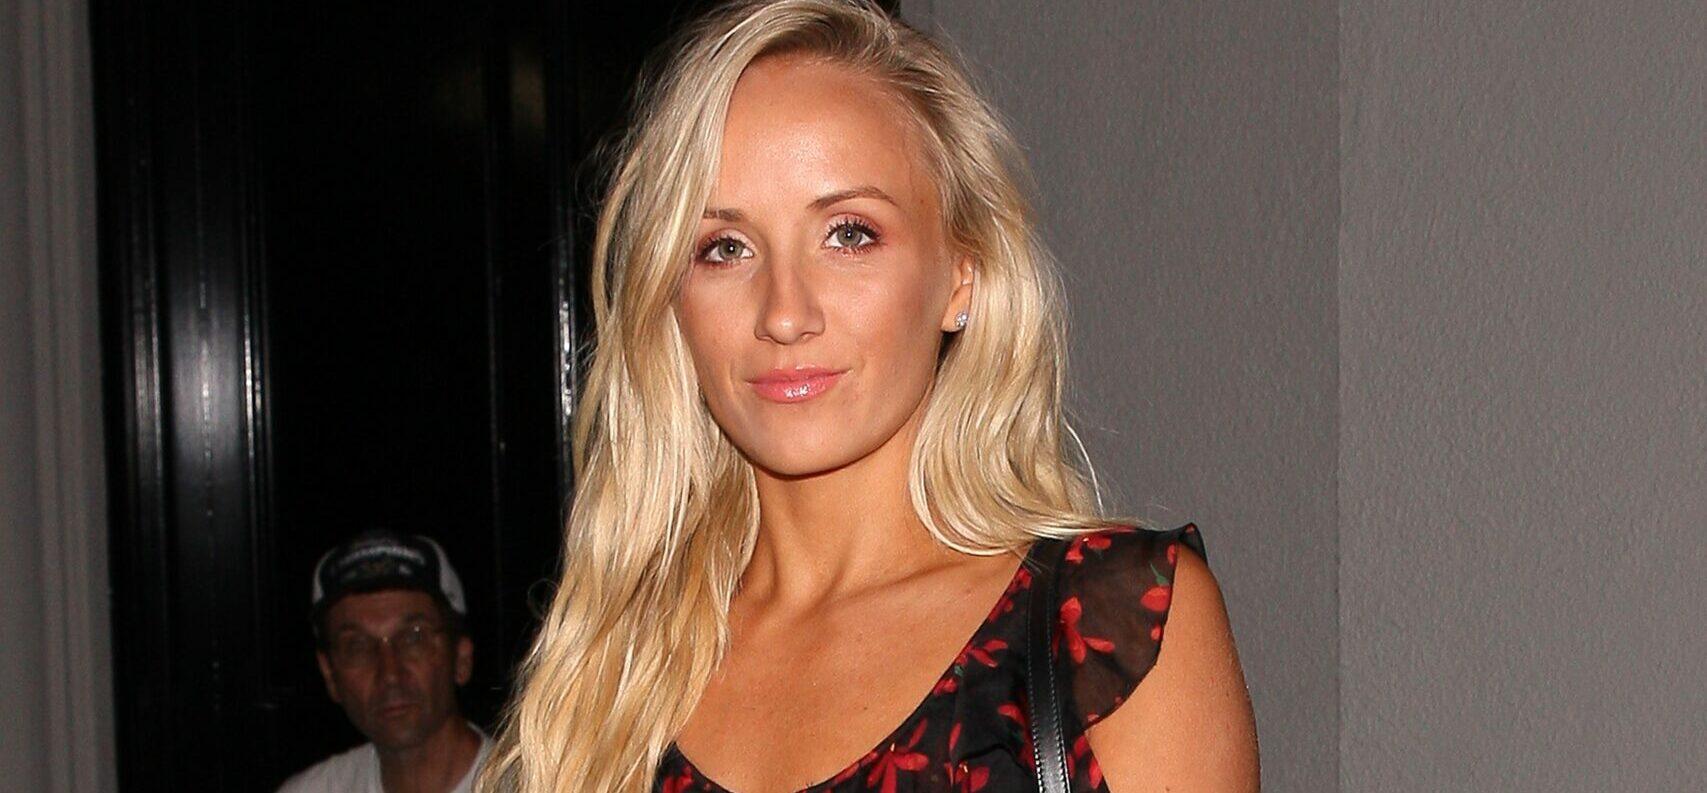 Gymnast Nastia Liukin Grabs Dumbbells To Share Her ‘Very Quick Workout’